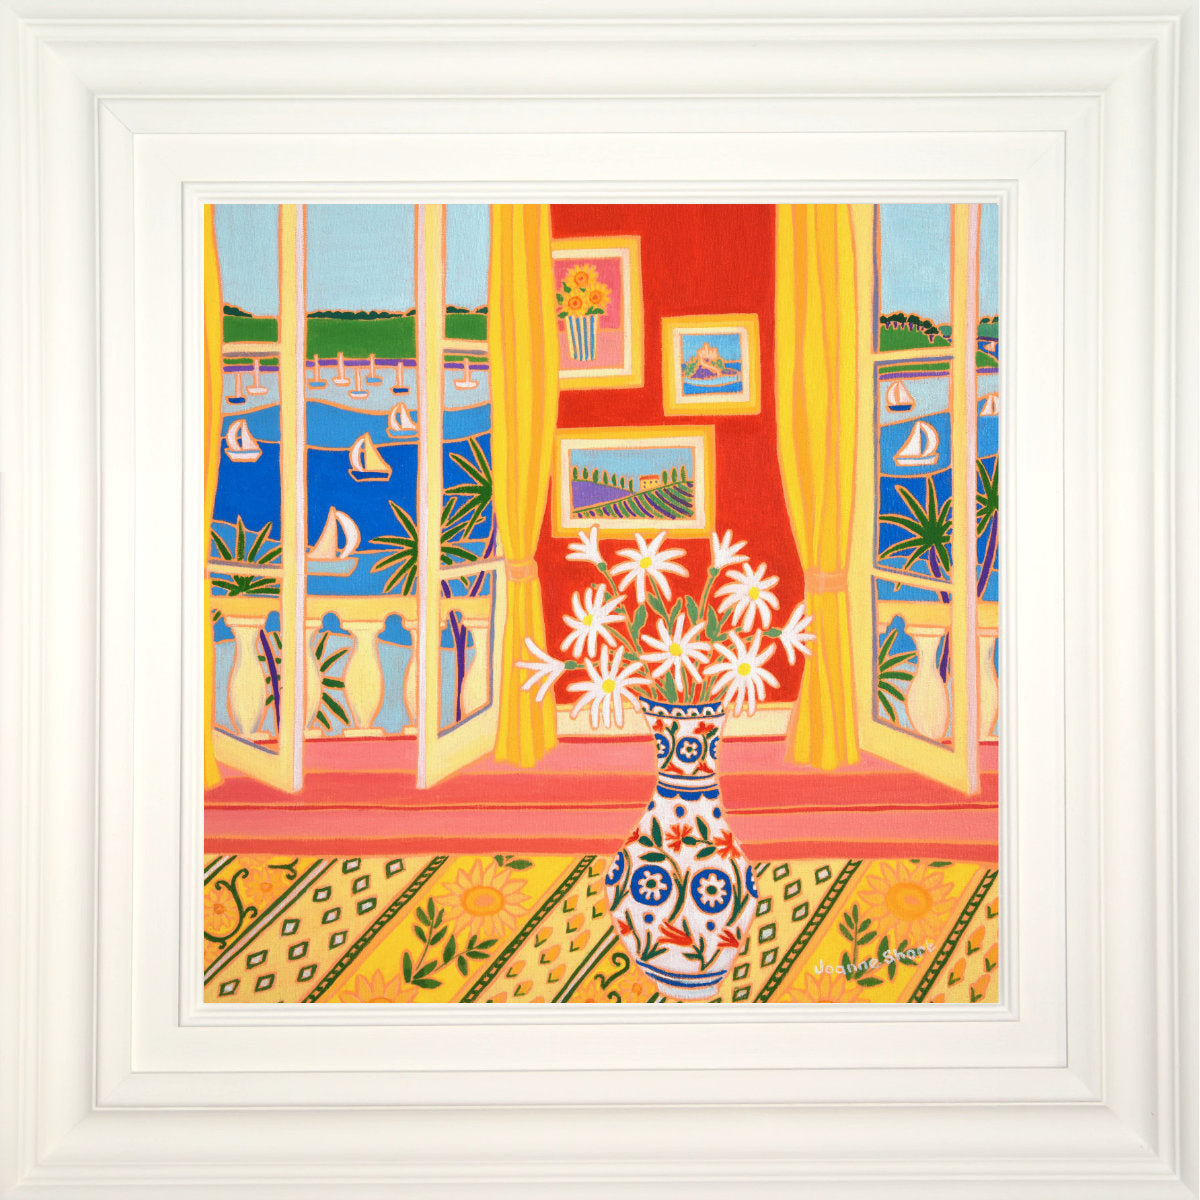 &#39;Paintings on the Wall and Daisies in a Vase, Falmouth River View&#39;,  18 x 18 inches, coastal oil on canvas. Painting by Cornish Artist Joanne Short. Cornish Art from our Cornwall Art Gallery